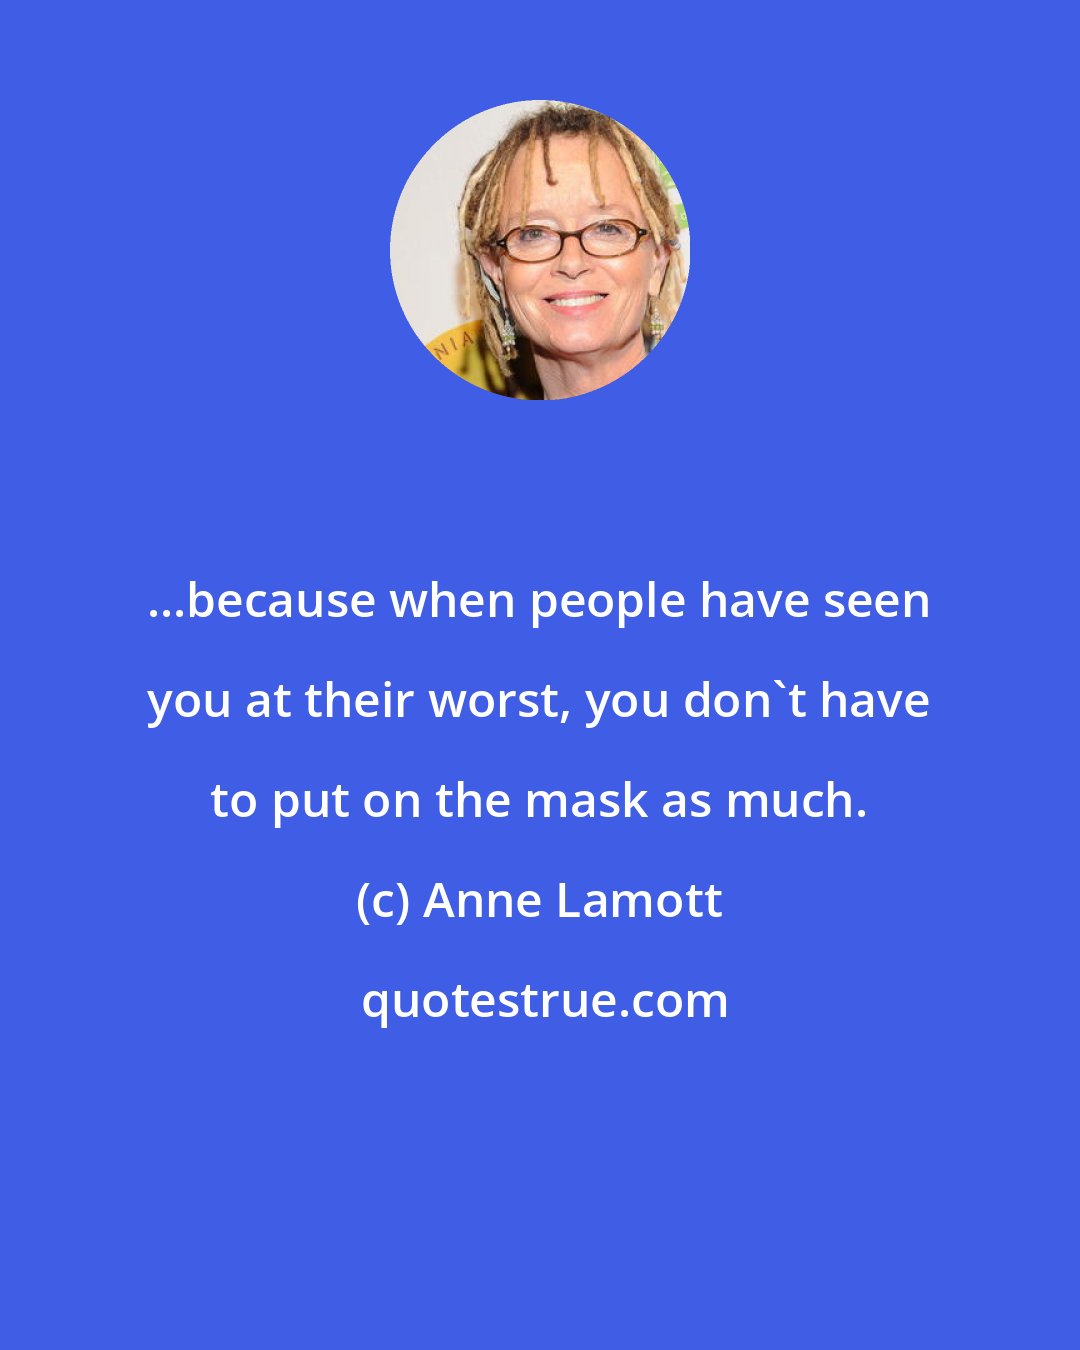 Anne Lamott: ...because when people have seen you at their worst, you don't have to put on the mask as much.